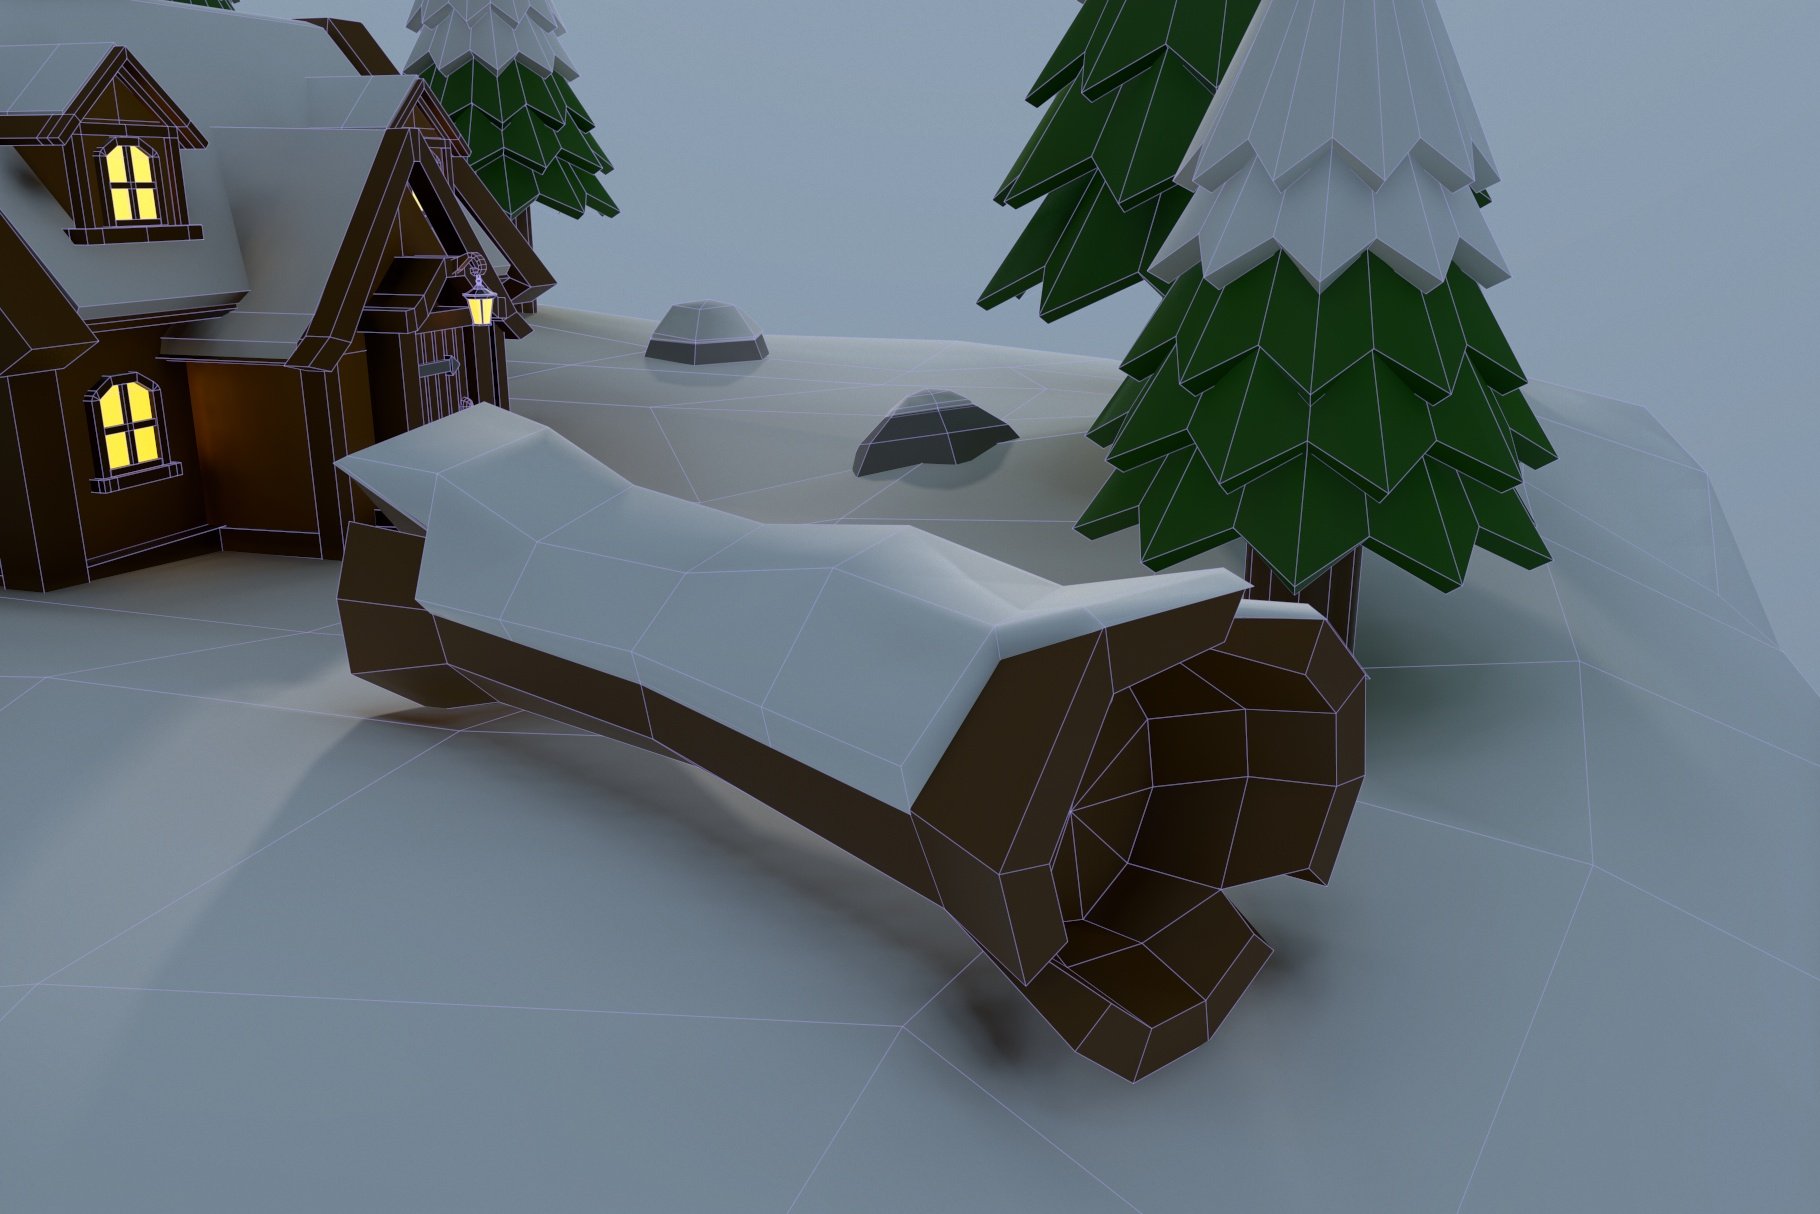 Mockup of snowy wood in close-up.